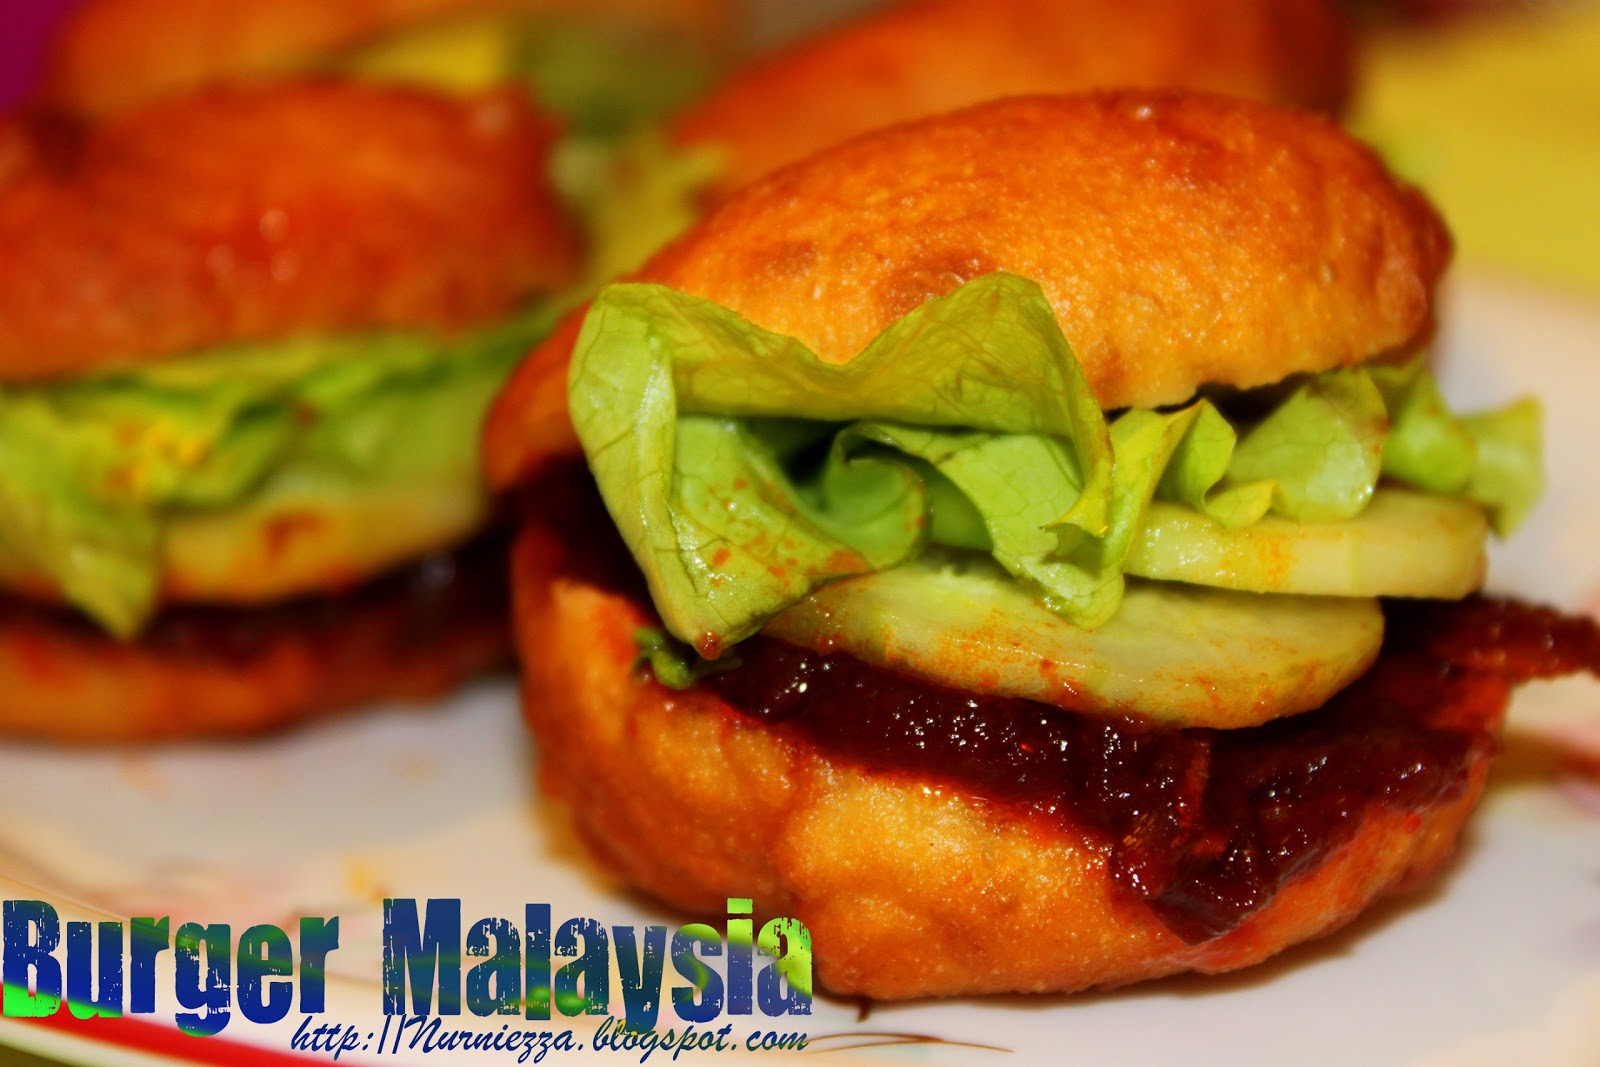 Our Journey Begins: Burger Malaysia